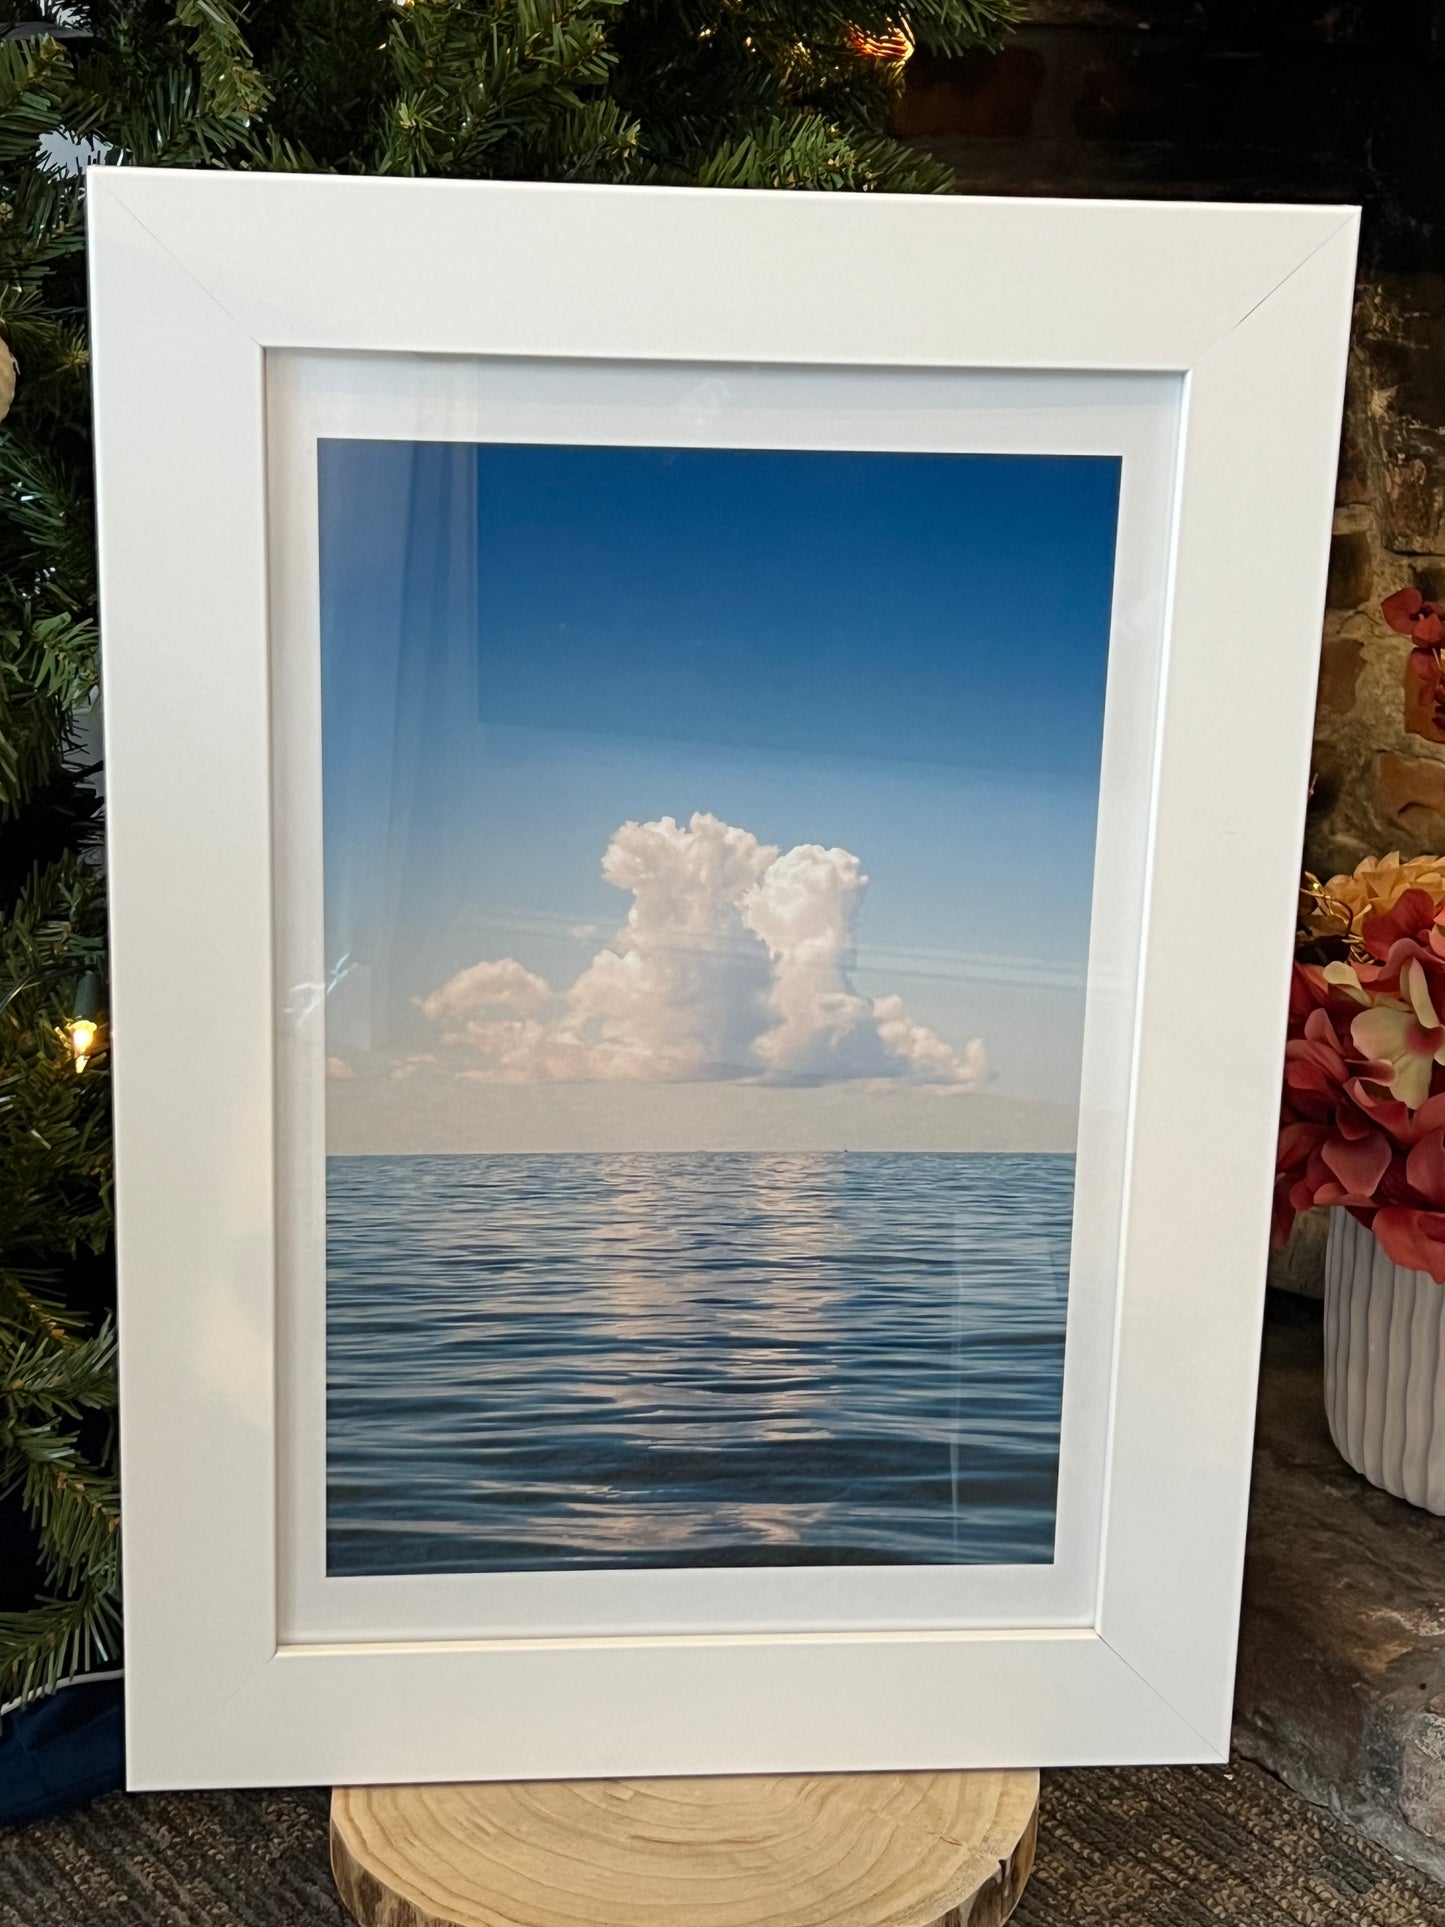 Framed 10x15" Giclee Print: Nantucket Sound Cloud by Brian Sager